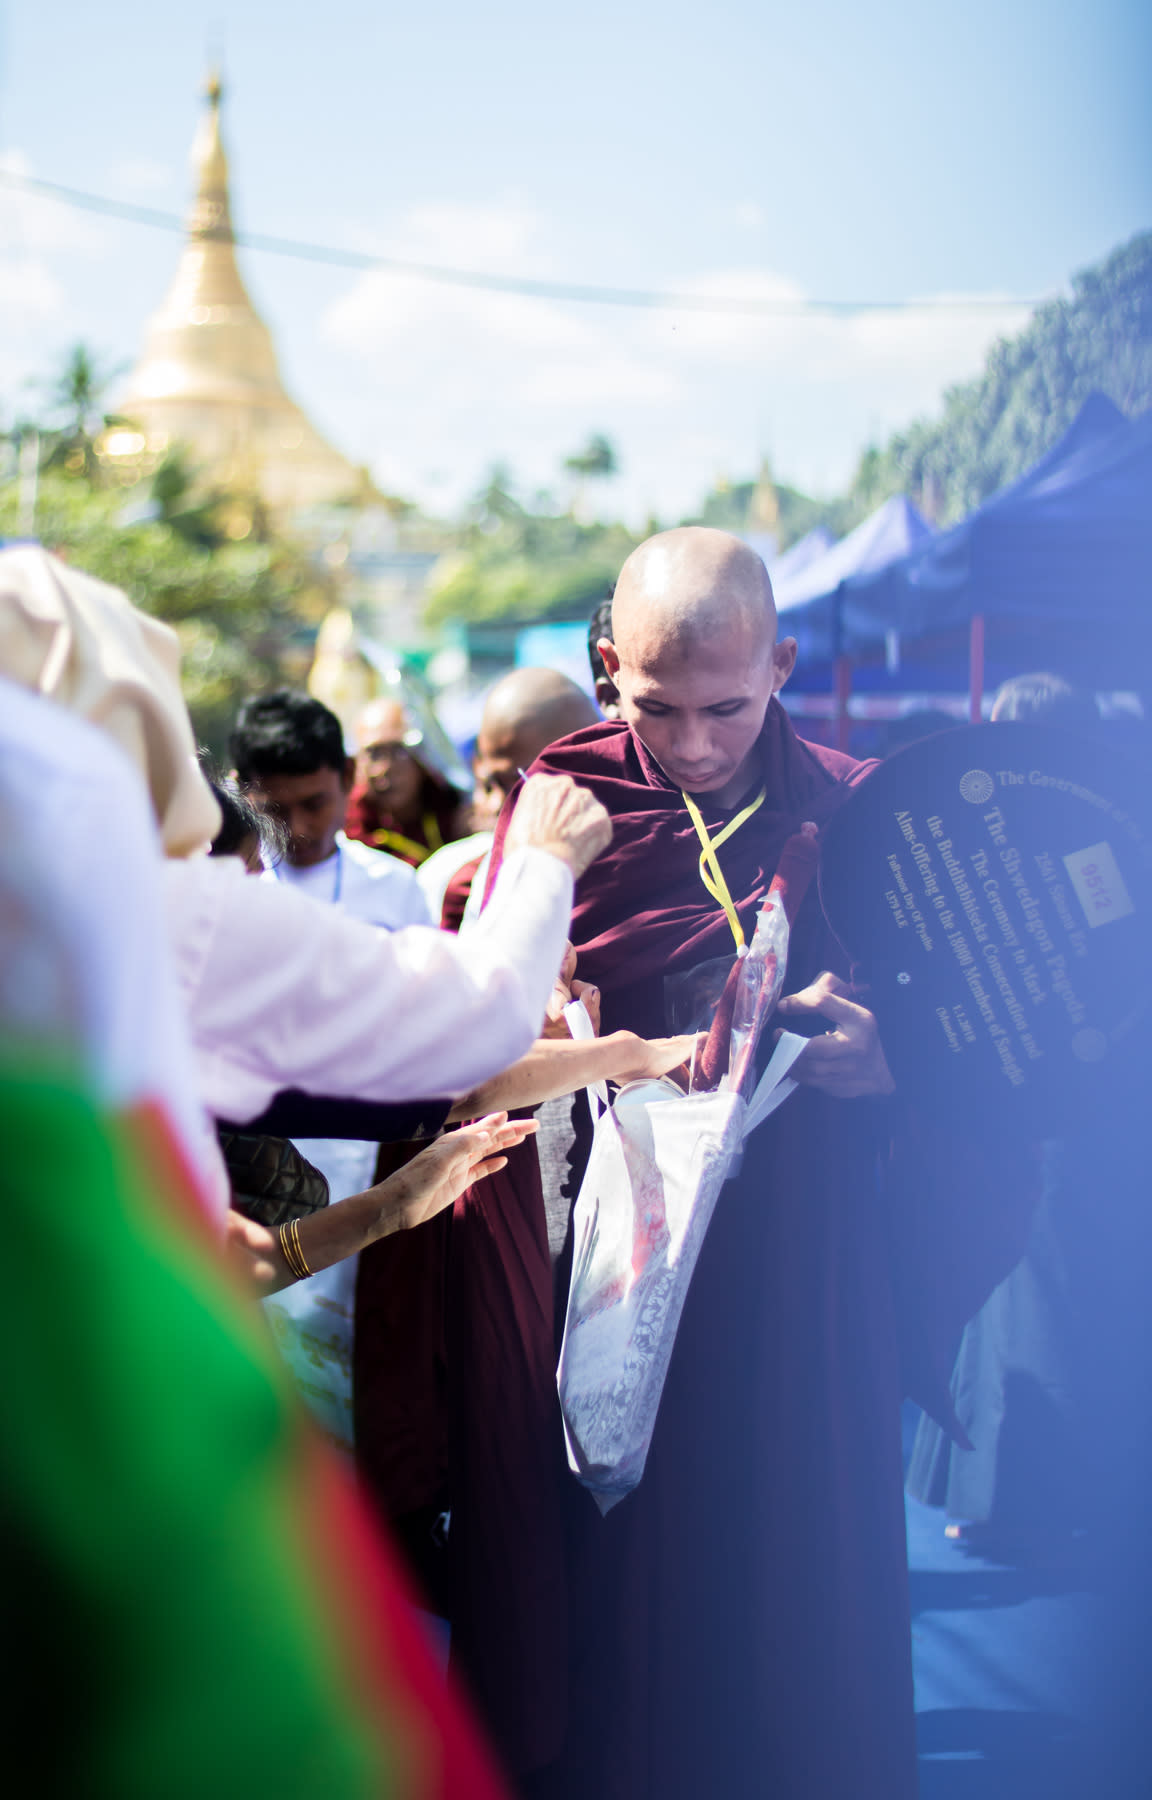 Monk receiving donation in front of Shwedagon Pagoda